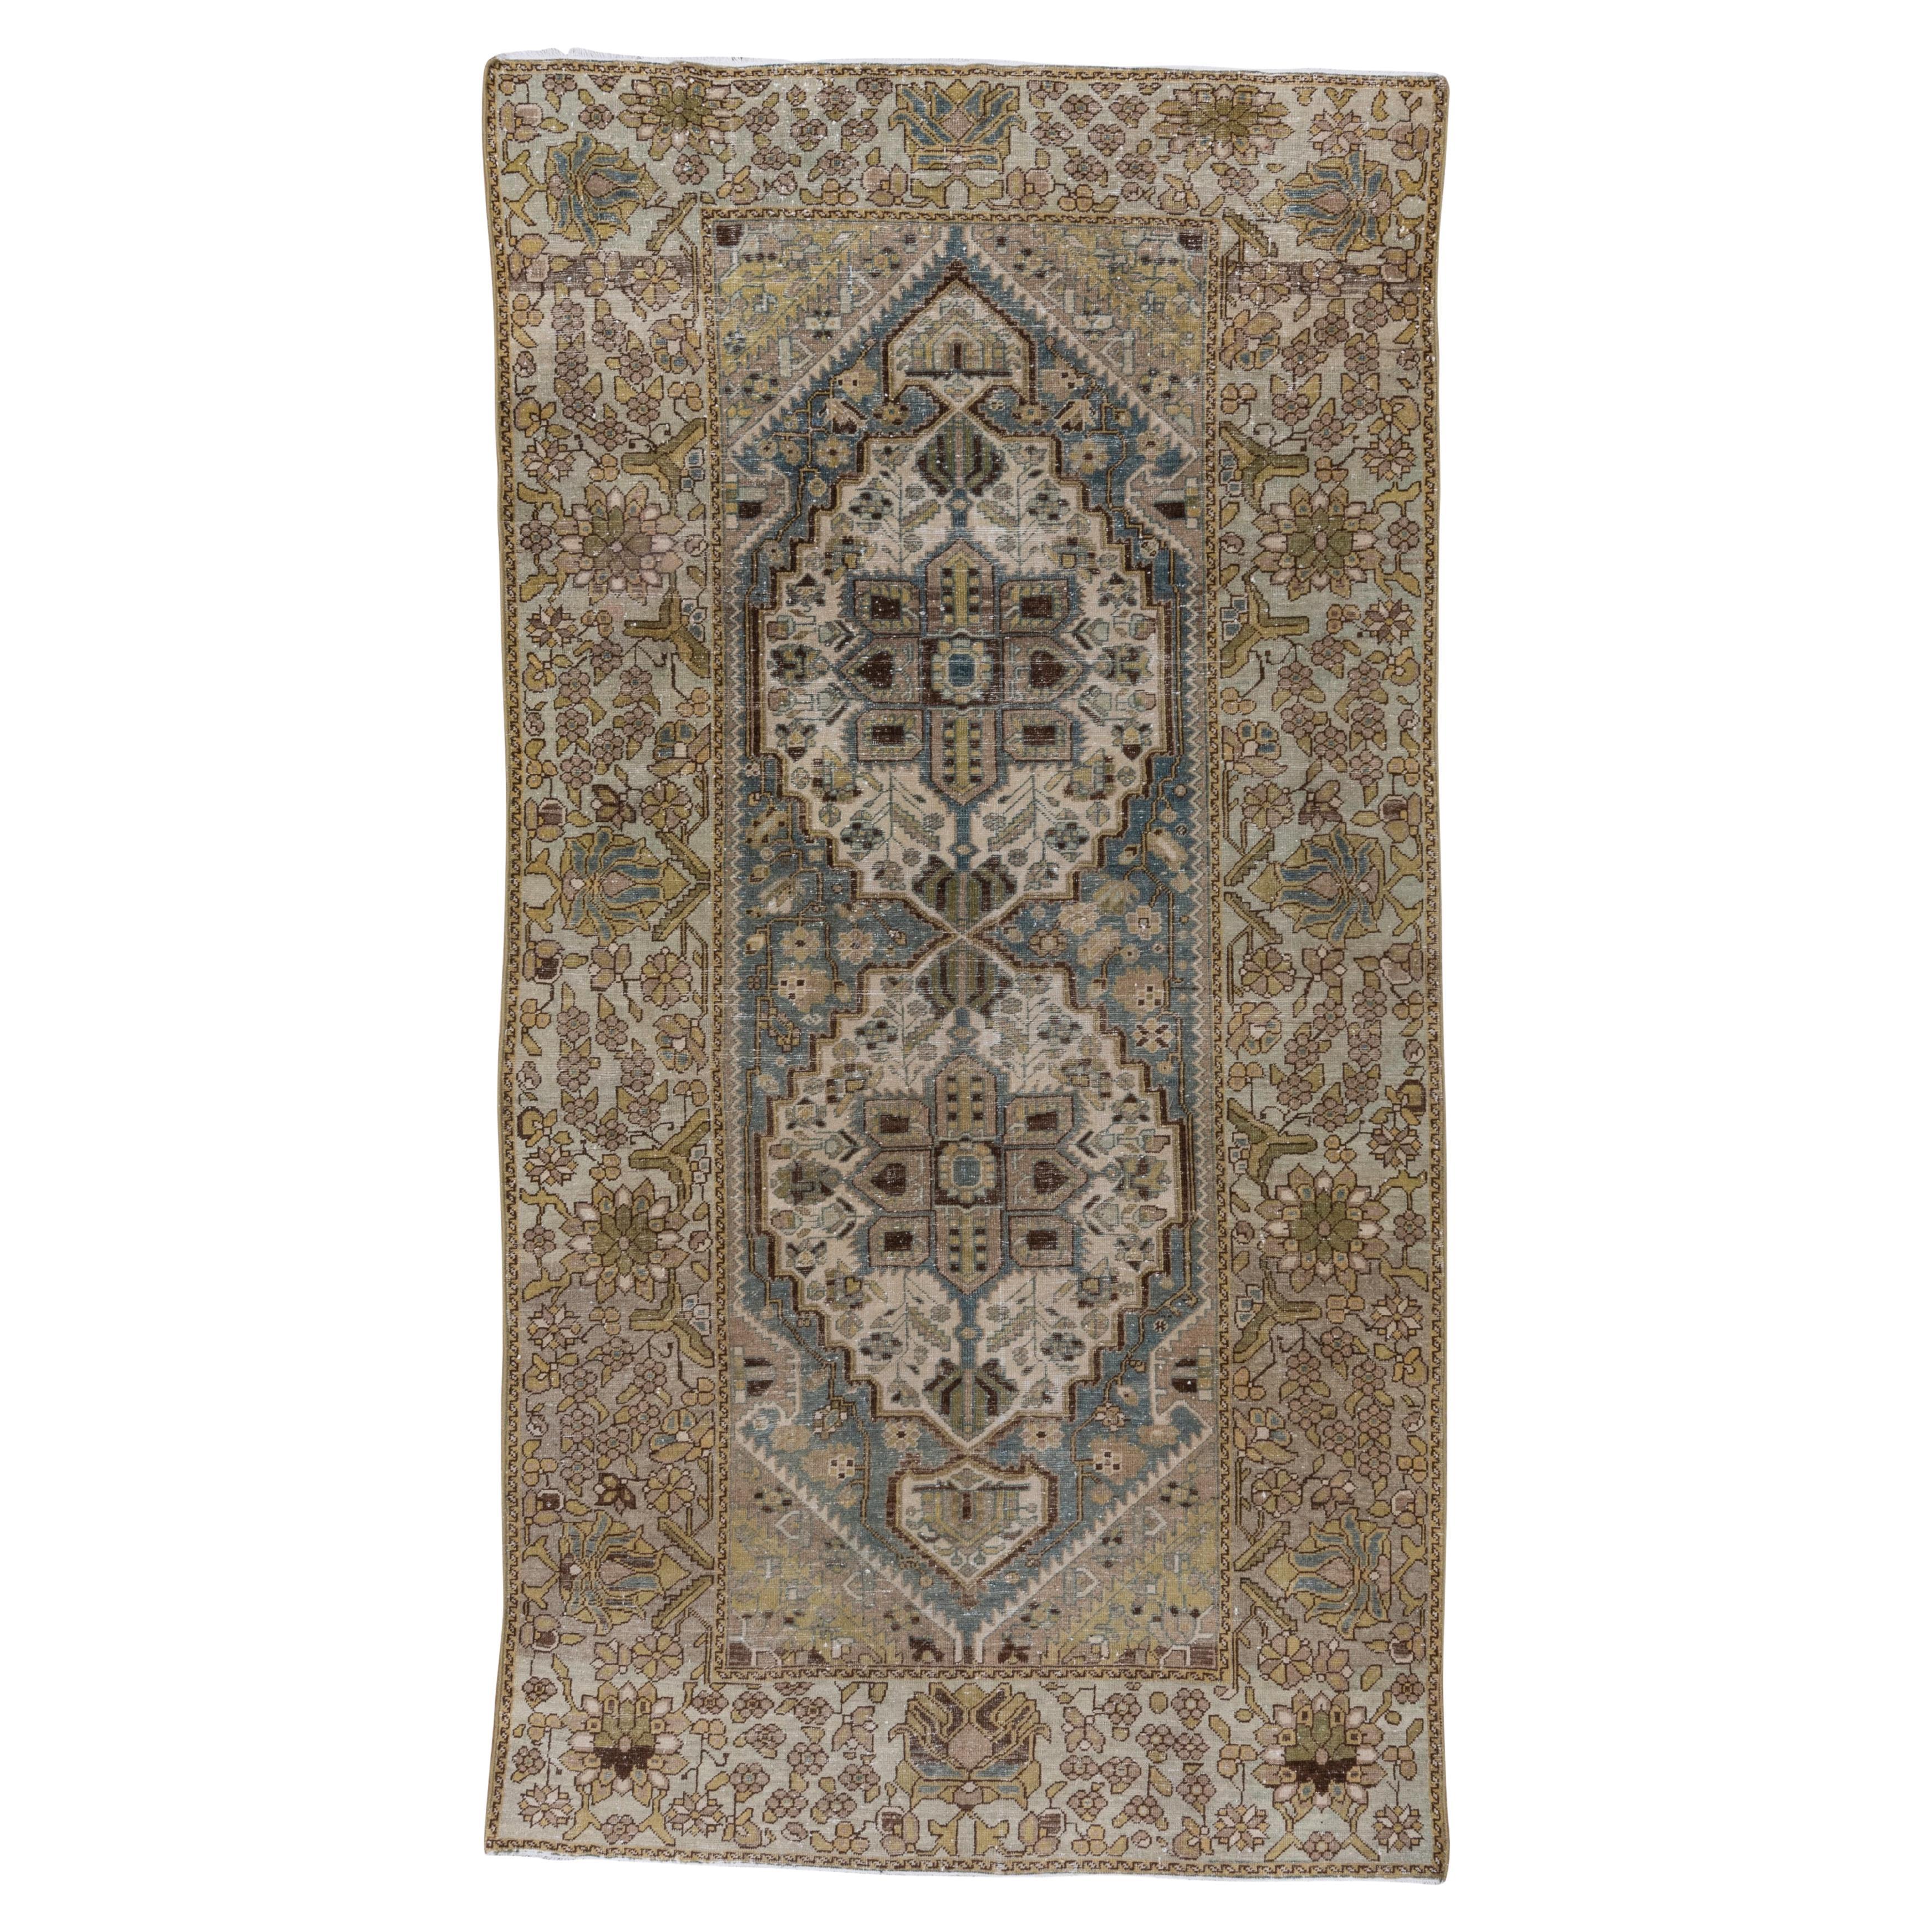 Beautiful Antique Persian Baktiary Gallery Rug, Slate Blue Field For Sale